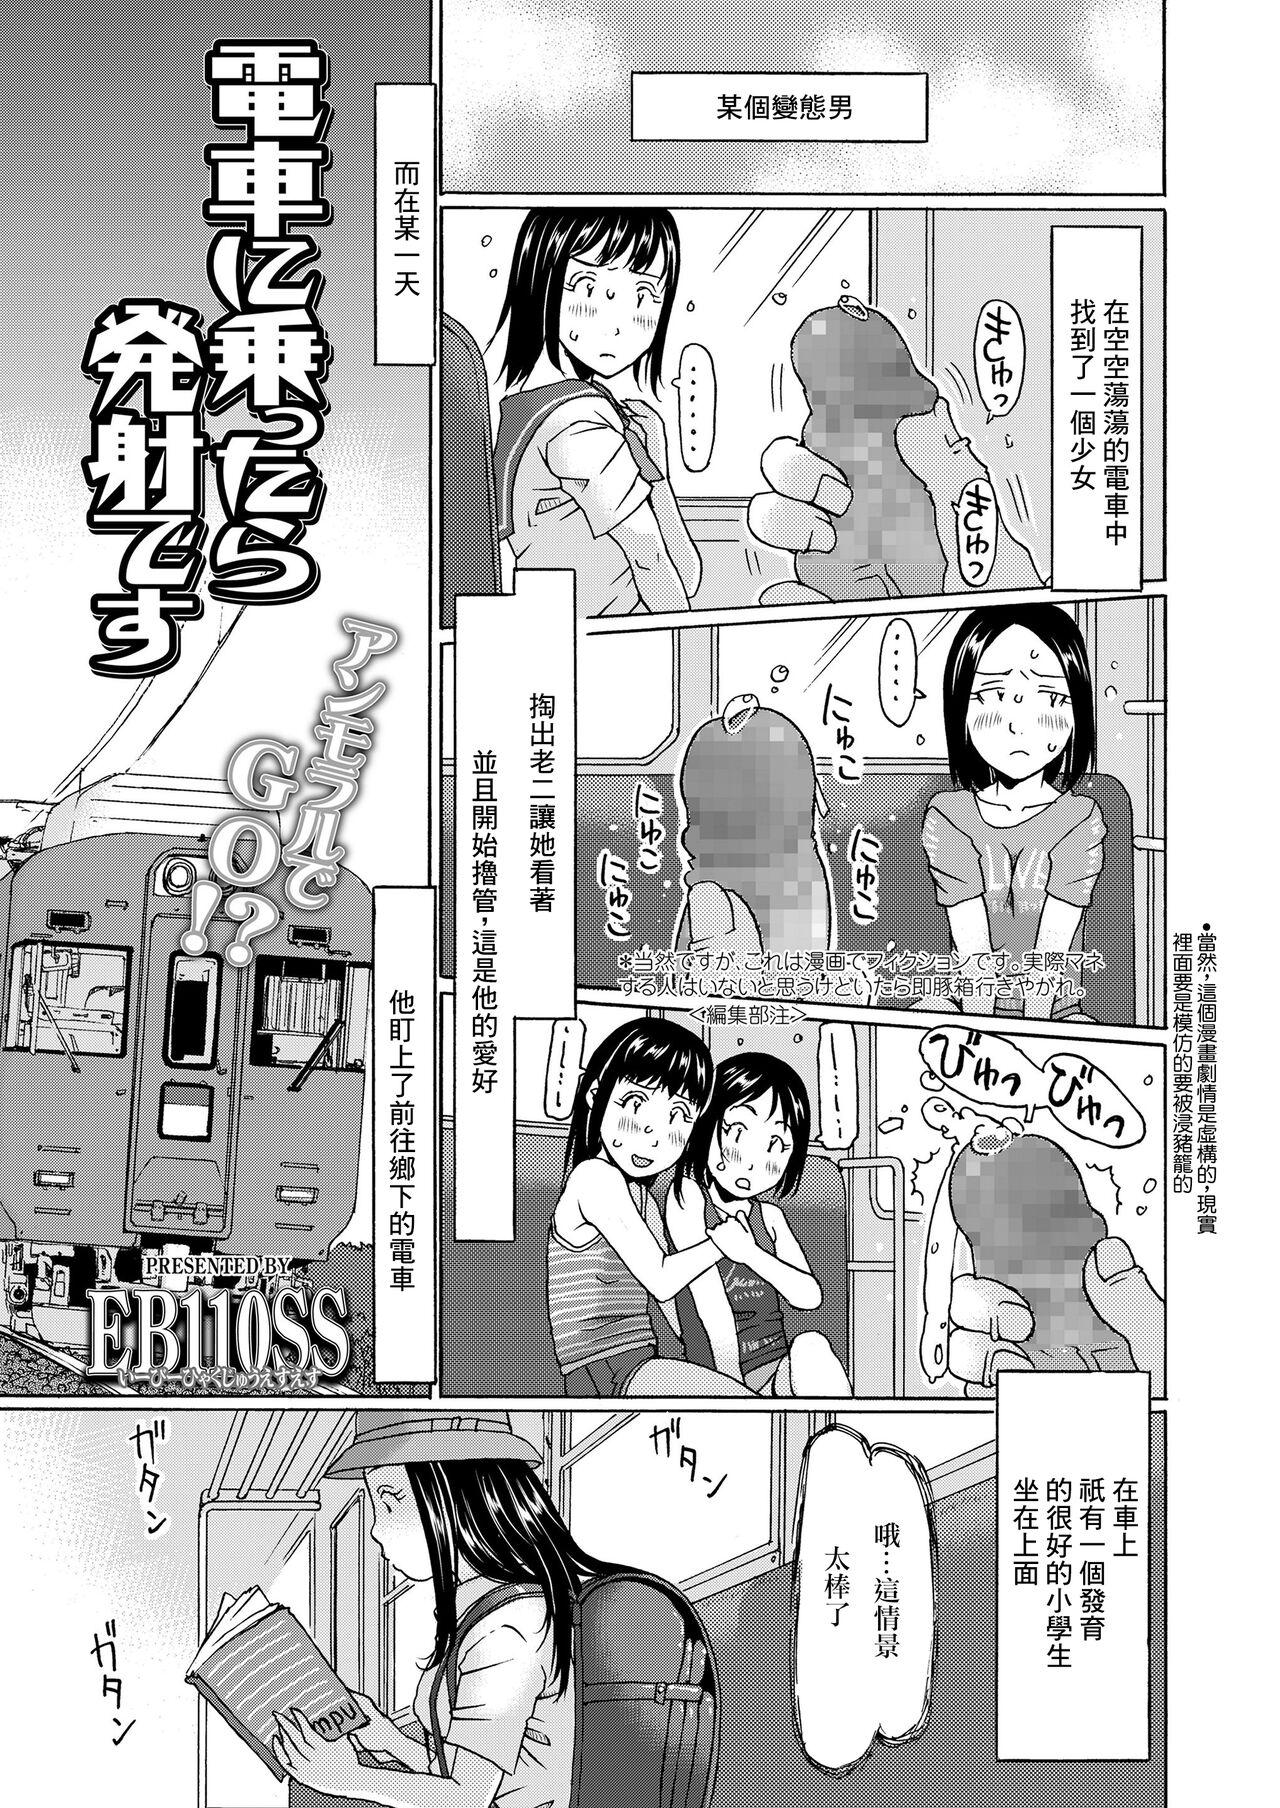 Oral Porn 電車に乗ったら発射です Hymen - Page 1